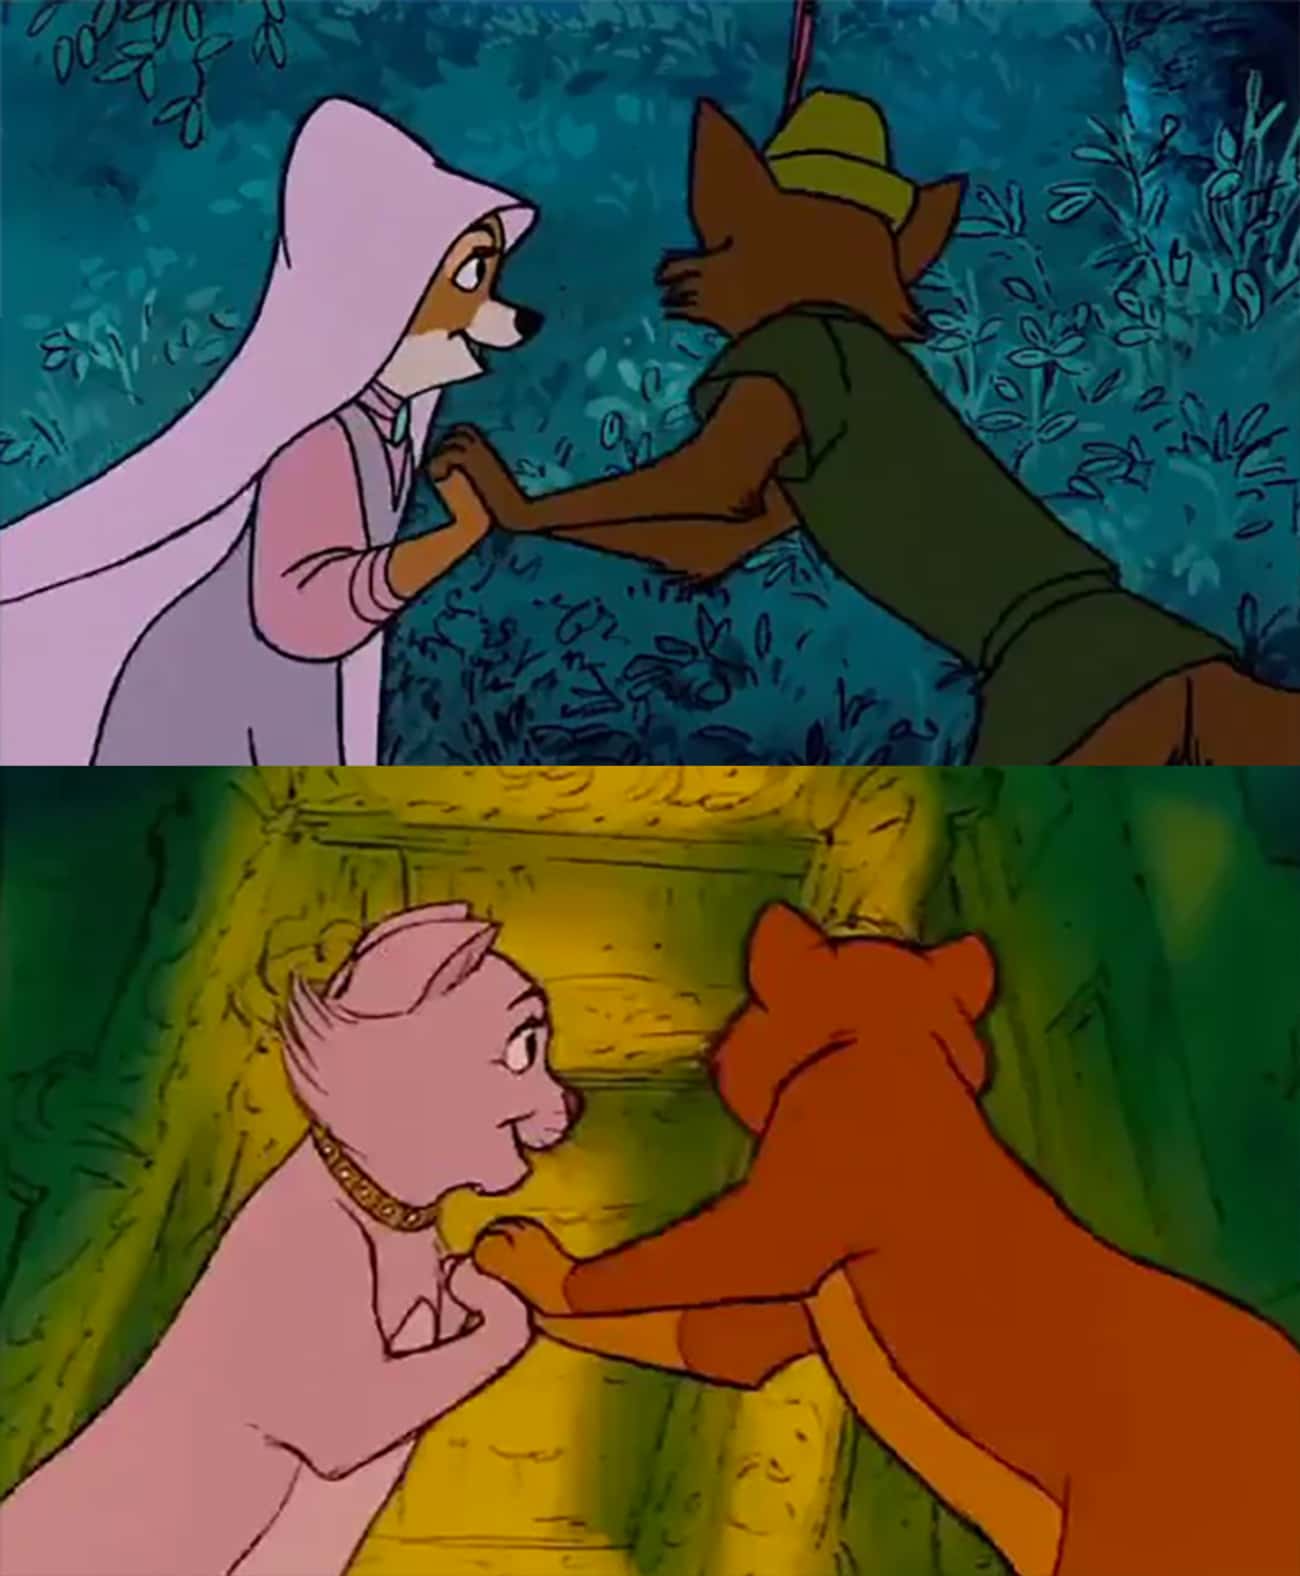 The Dancing Scene In 'Robin Hood' Recycles Animation From 'The Aristocats' 